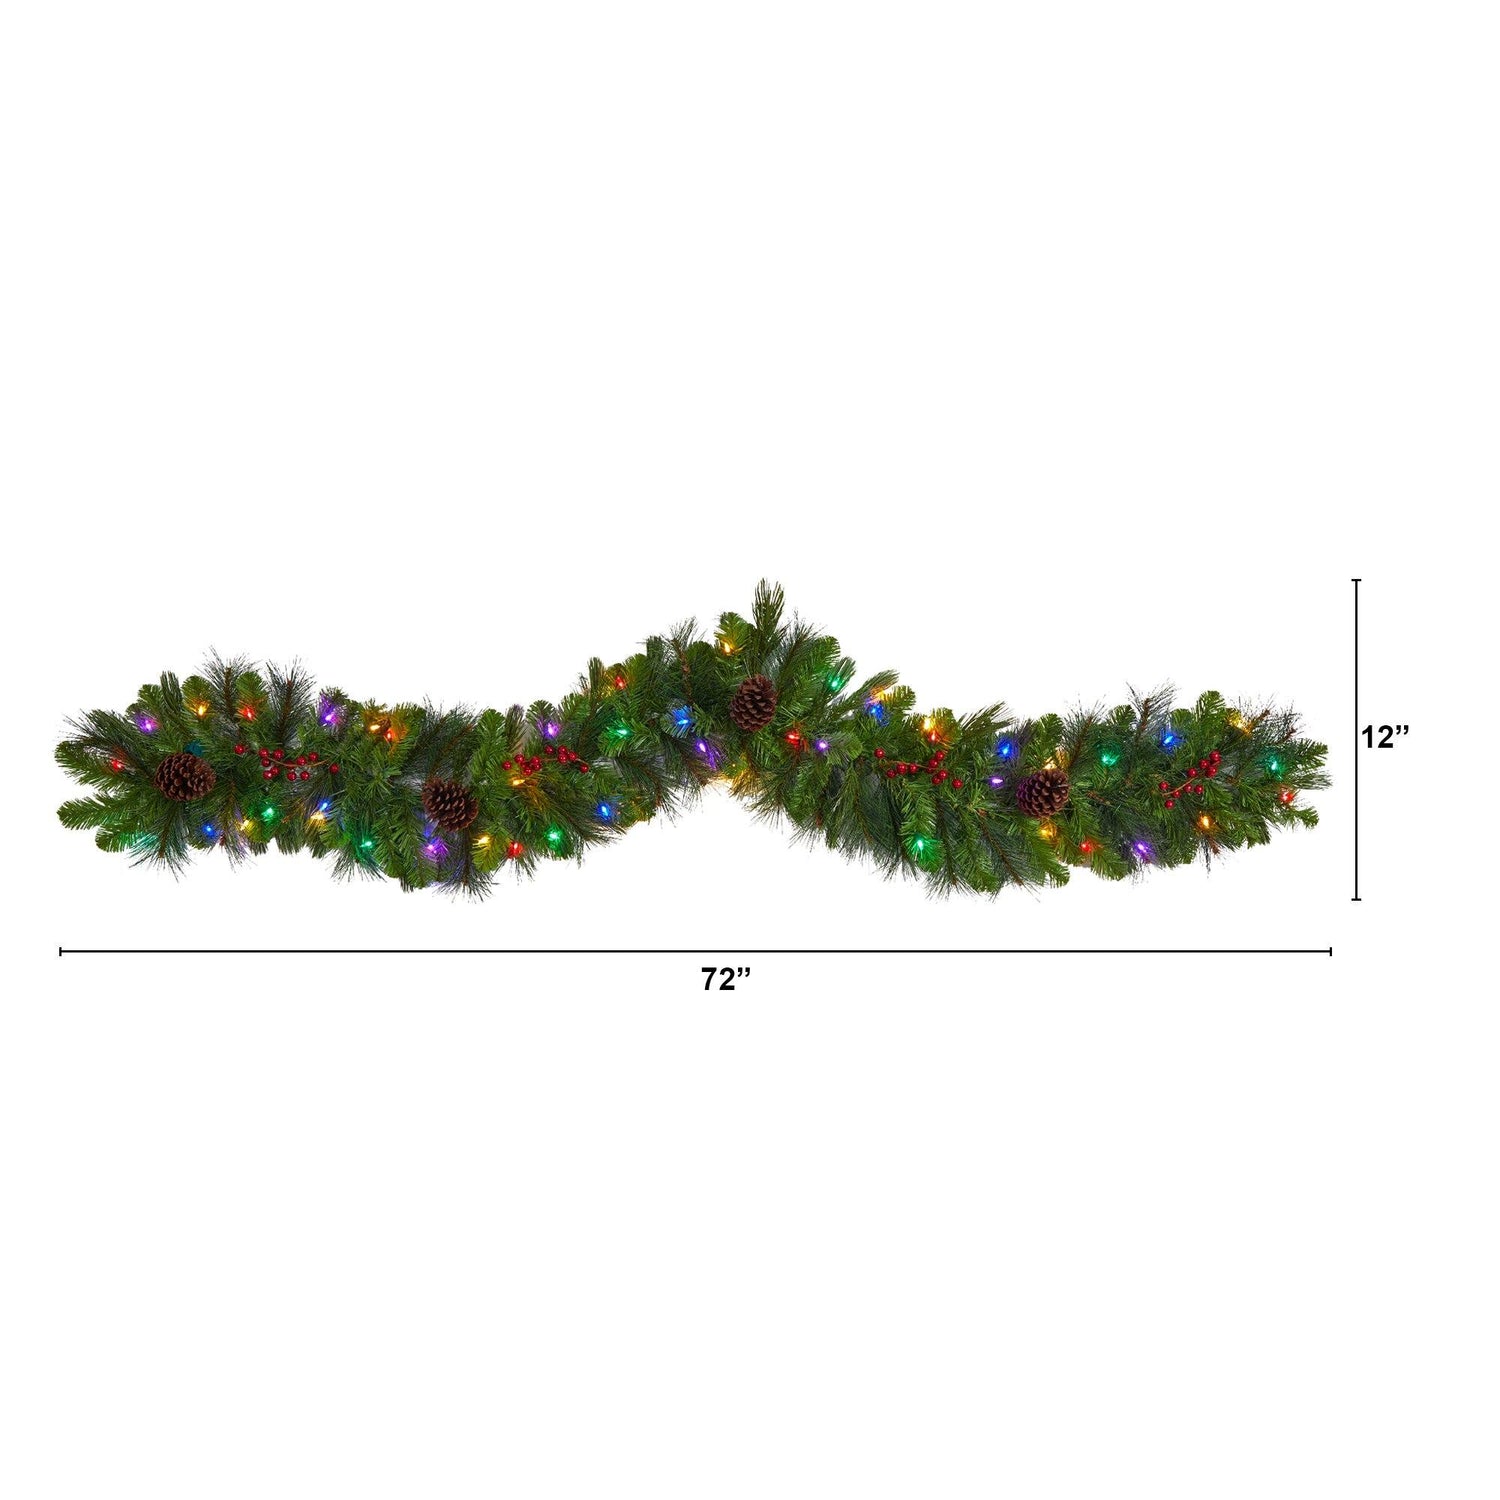 6' Colorado Fir Artificial Christmas Garland with 50 Multicolored LED Lights, Berries and Pinecones